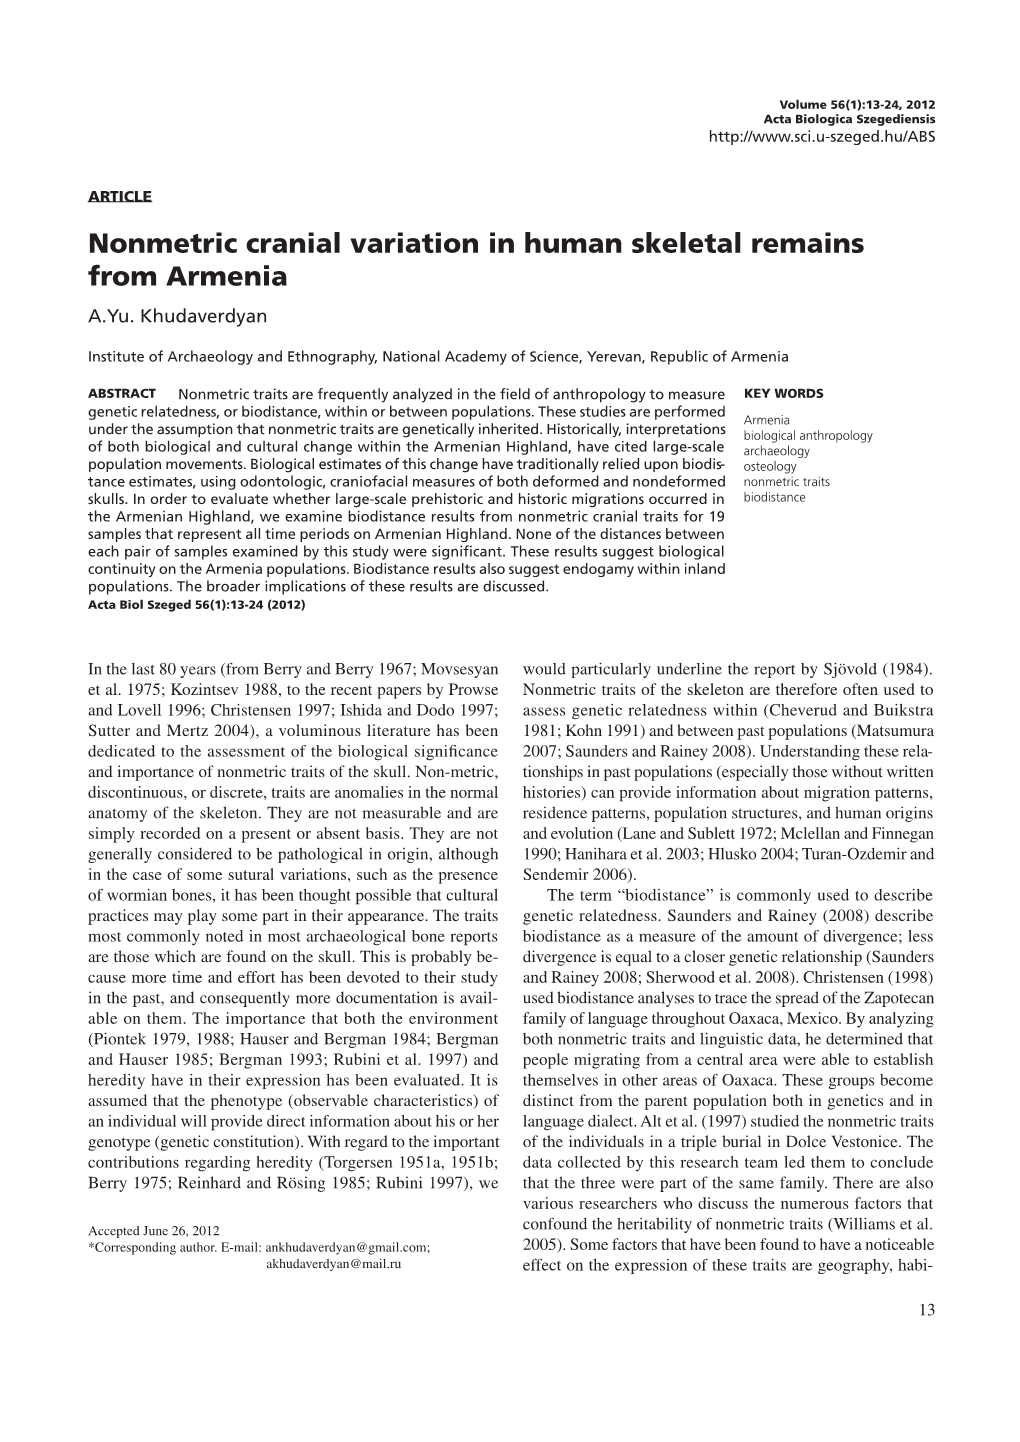 Nonmetric Cranial Variation in Human Skeletal Remains from Armenia A.Yu